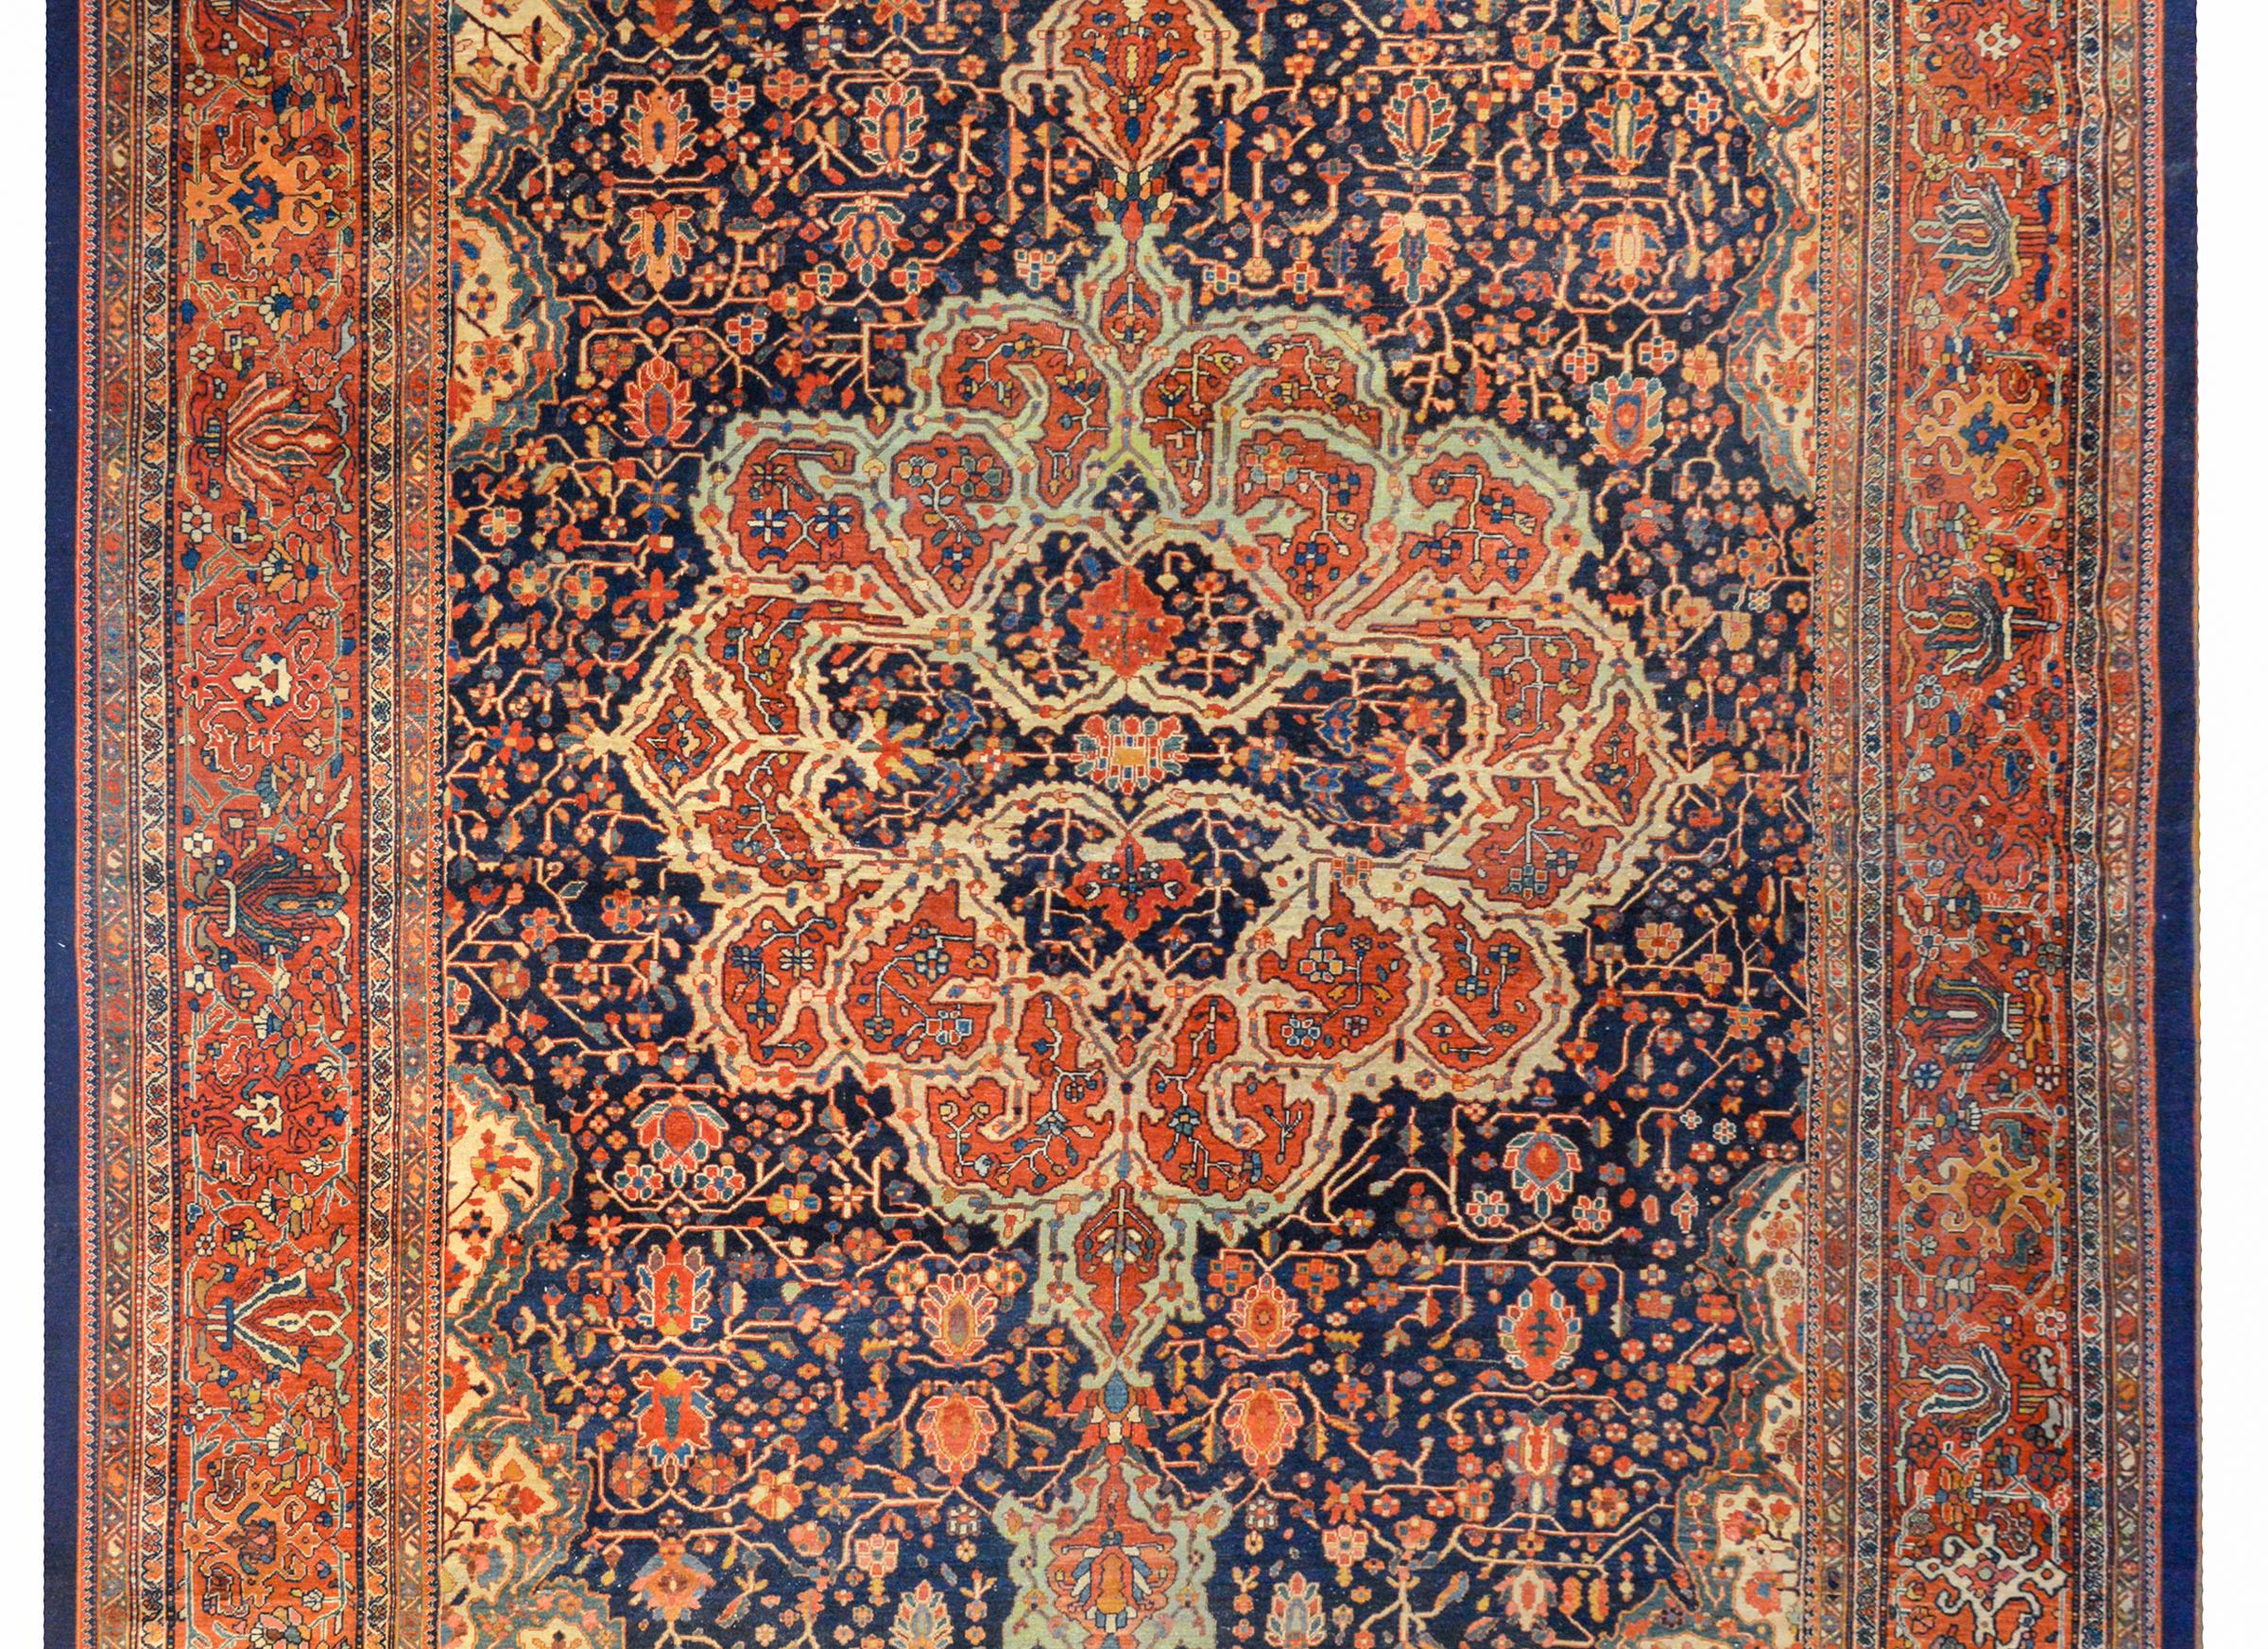 An extraordinary early 20th century Persian Sarouk Farahan rug with a wonderfully woven abstract medallion woven in myriad flowers and vines with a crimson background, all on a field of more flowers and vines on a dark indigo background surrounded